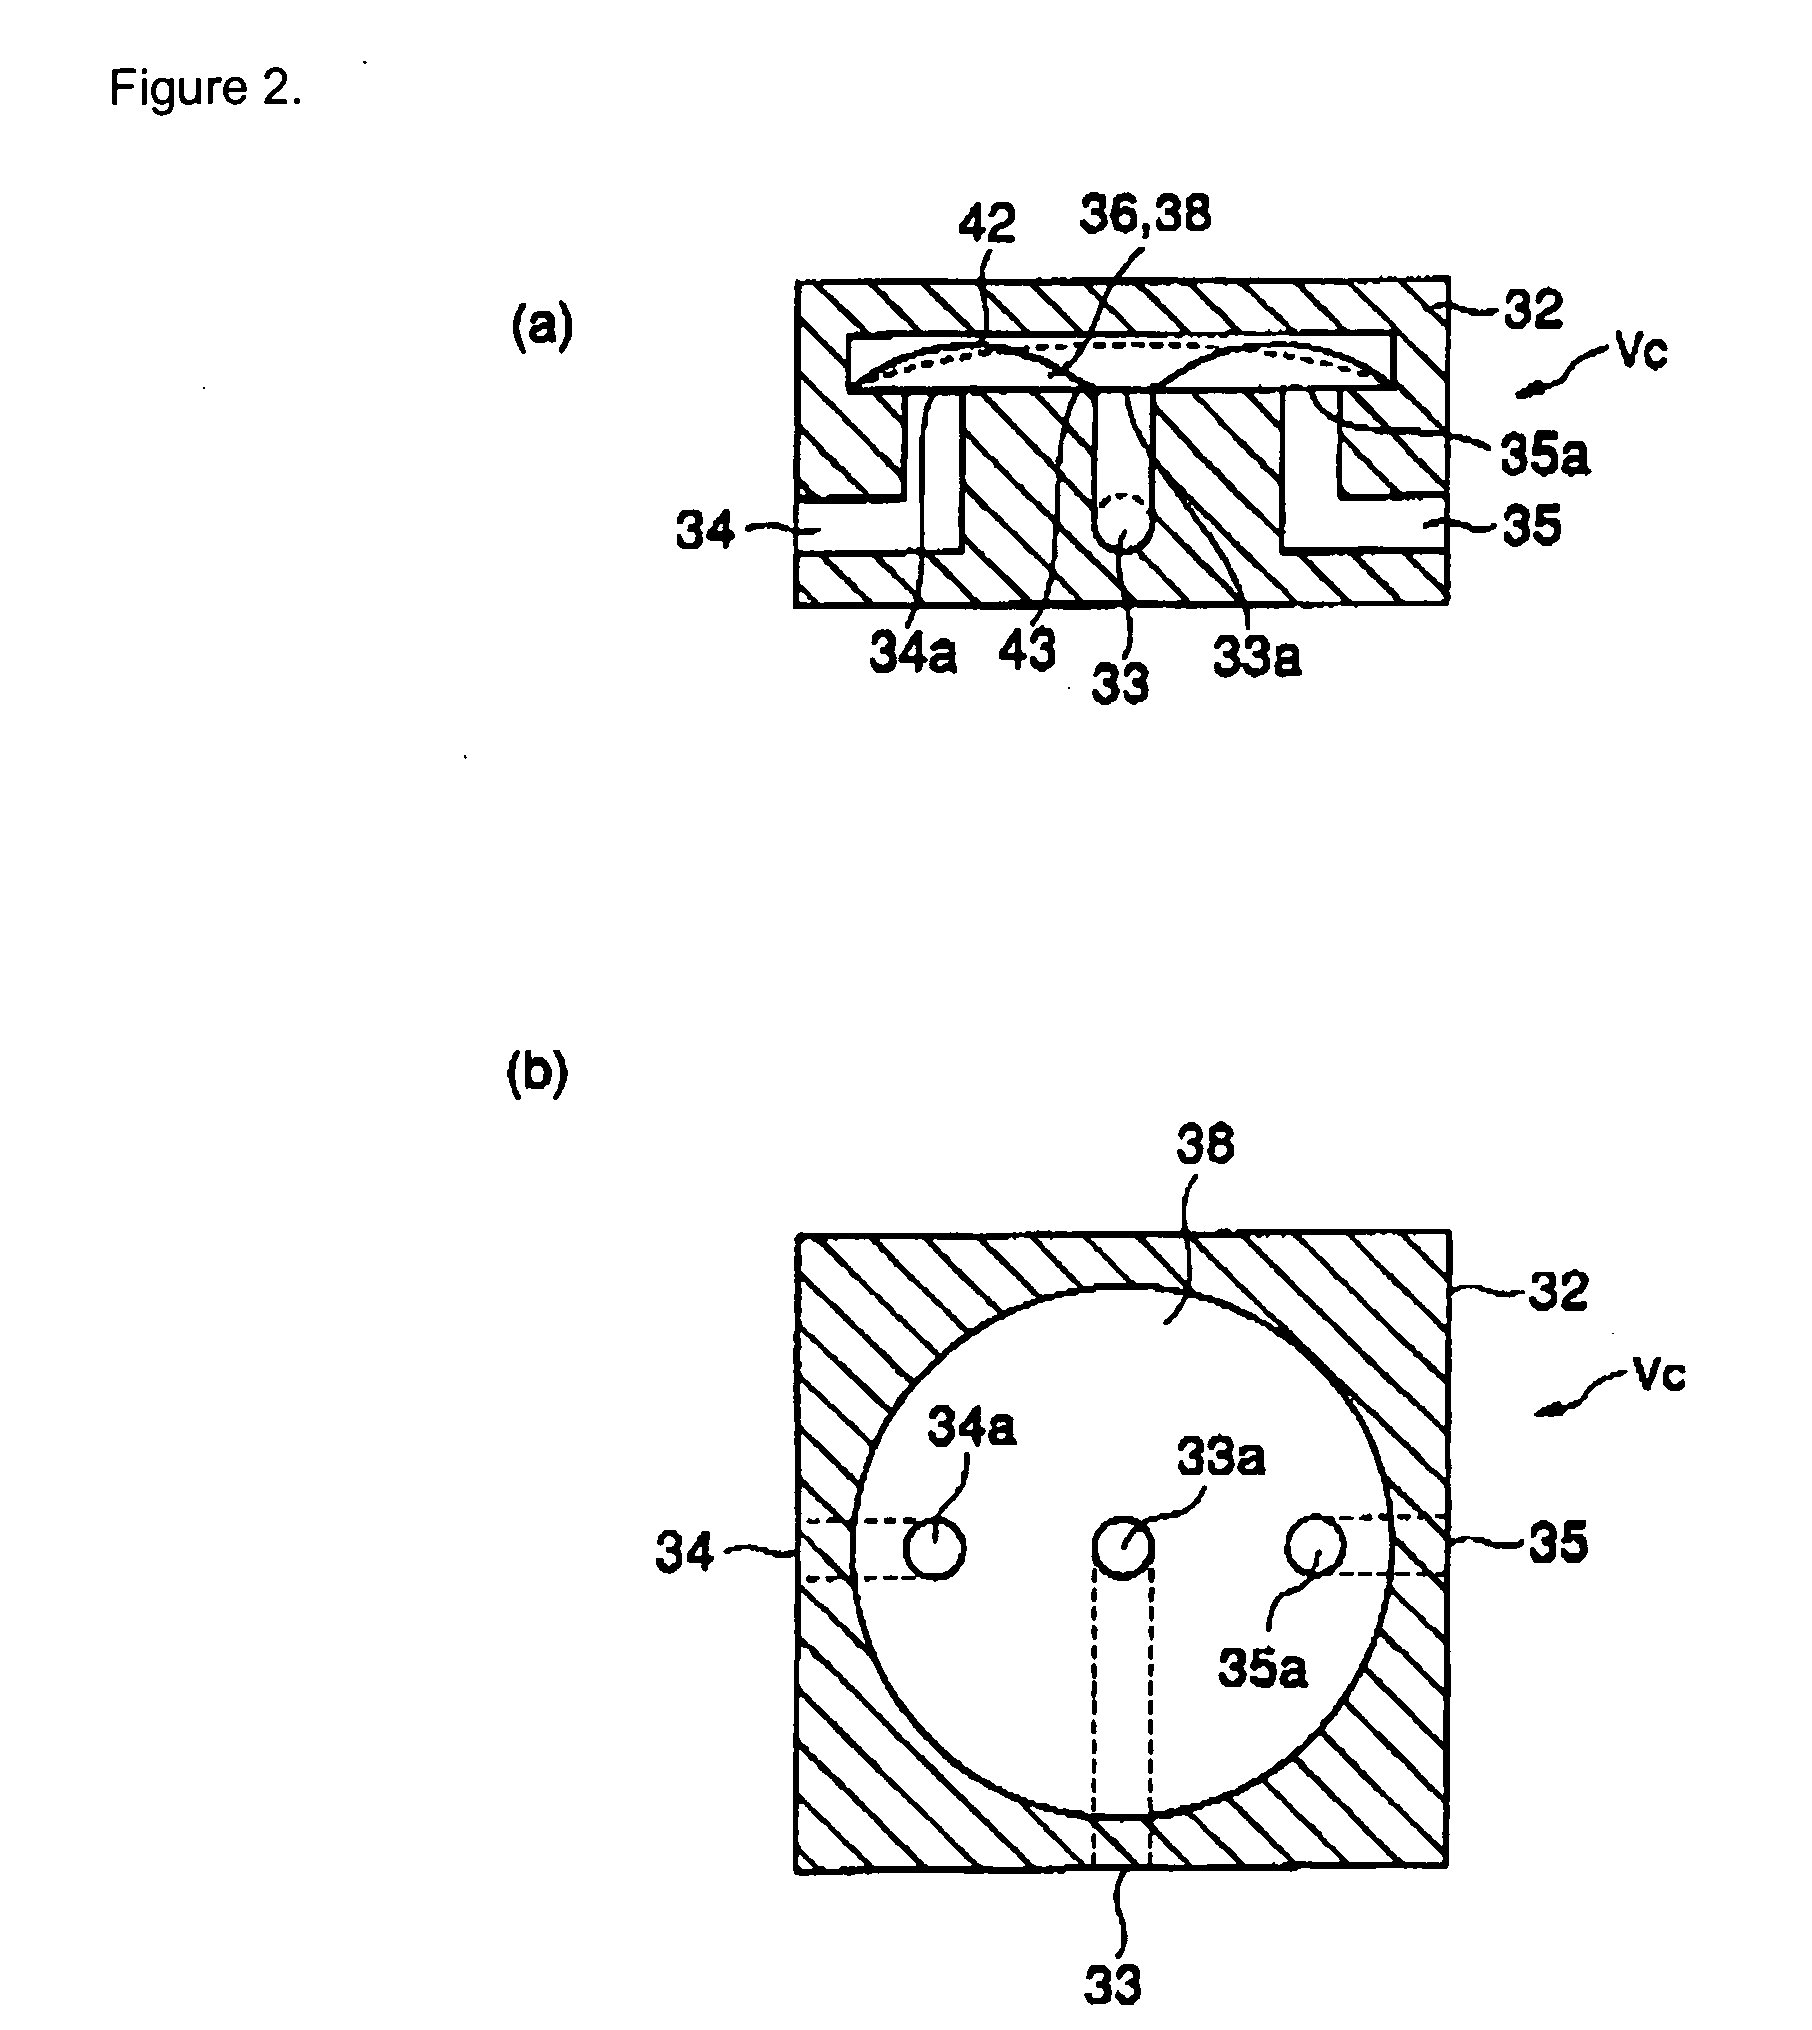 Source liquid supply apparatus having a cleaning function